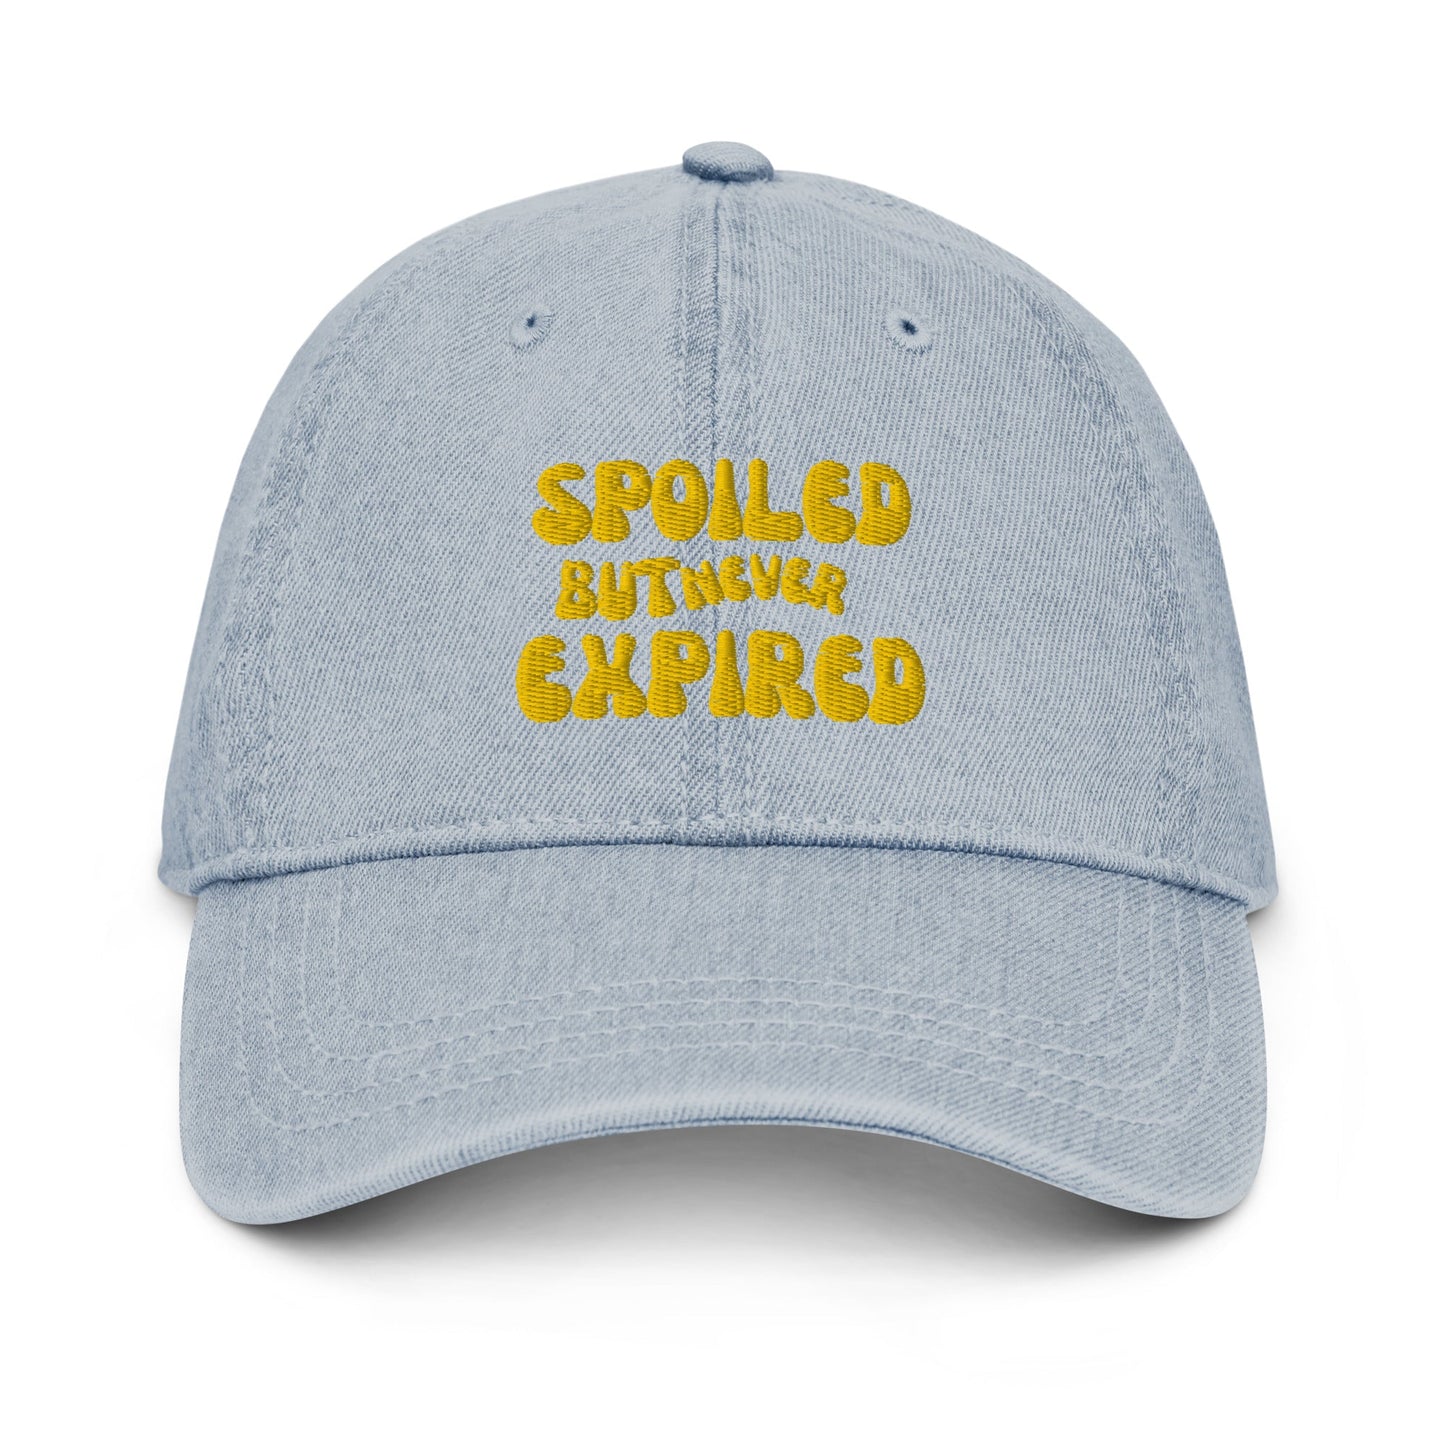 Spoiled But Never Expired Denim Hat - Catch This Tea Shirts